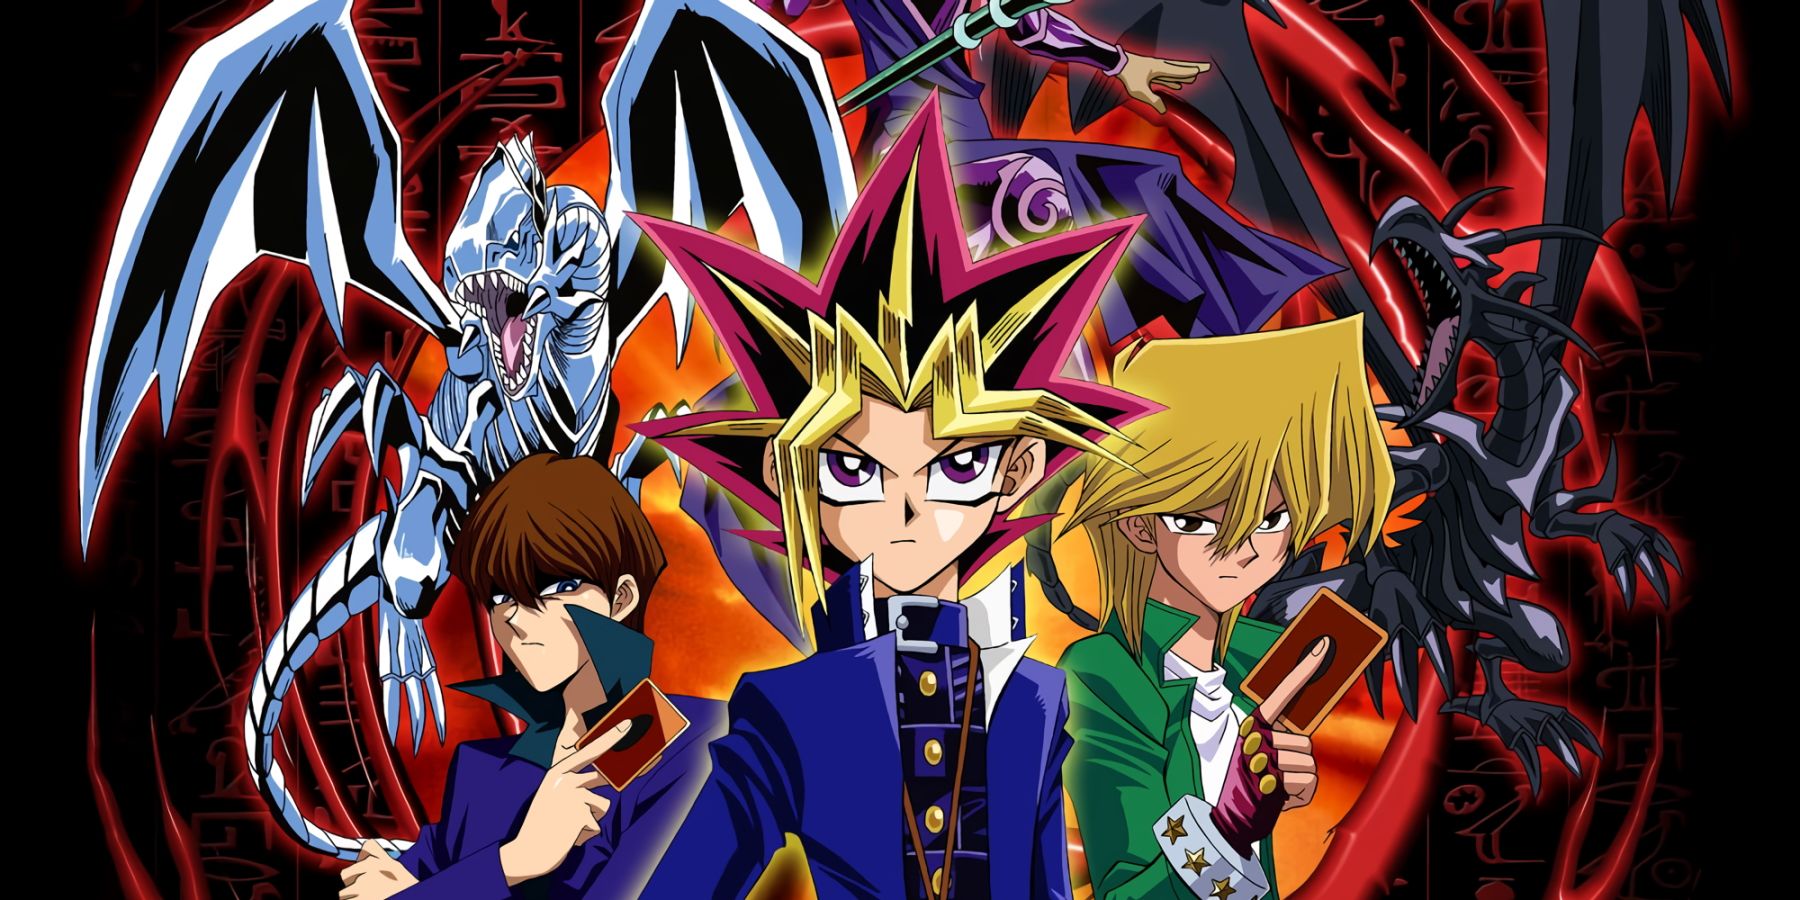 A promotional visual for the Yu-Gi-Oh anime featuring Yugi, Joey, and Kaiba.